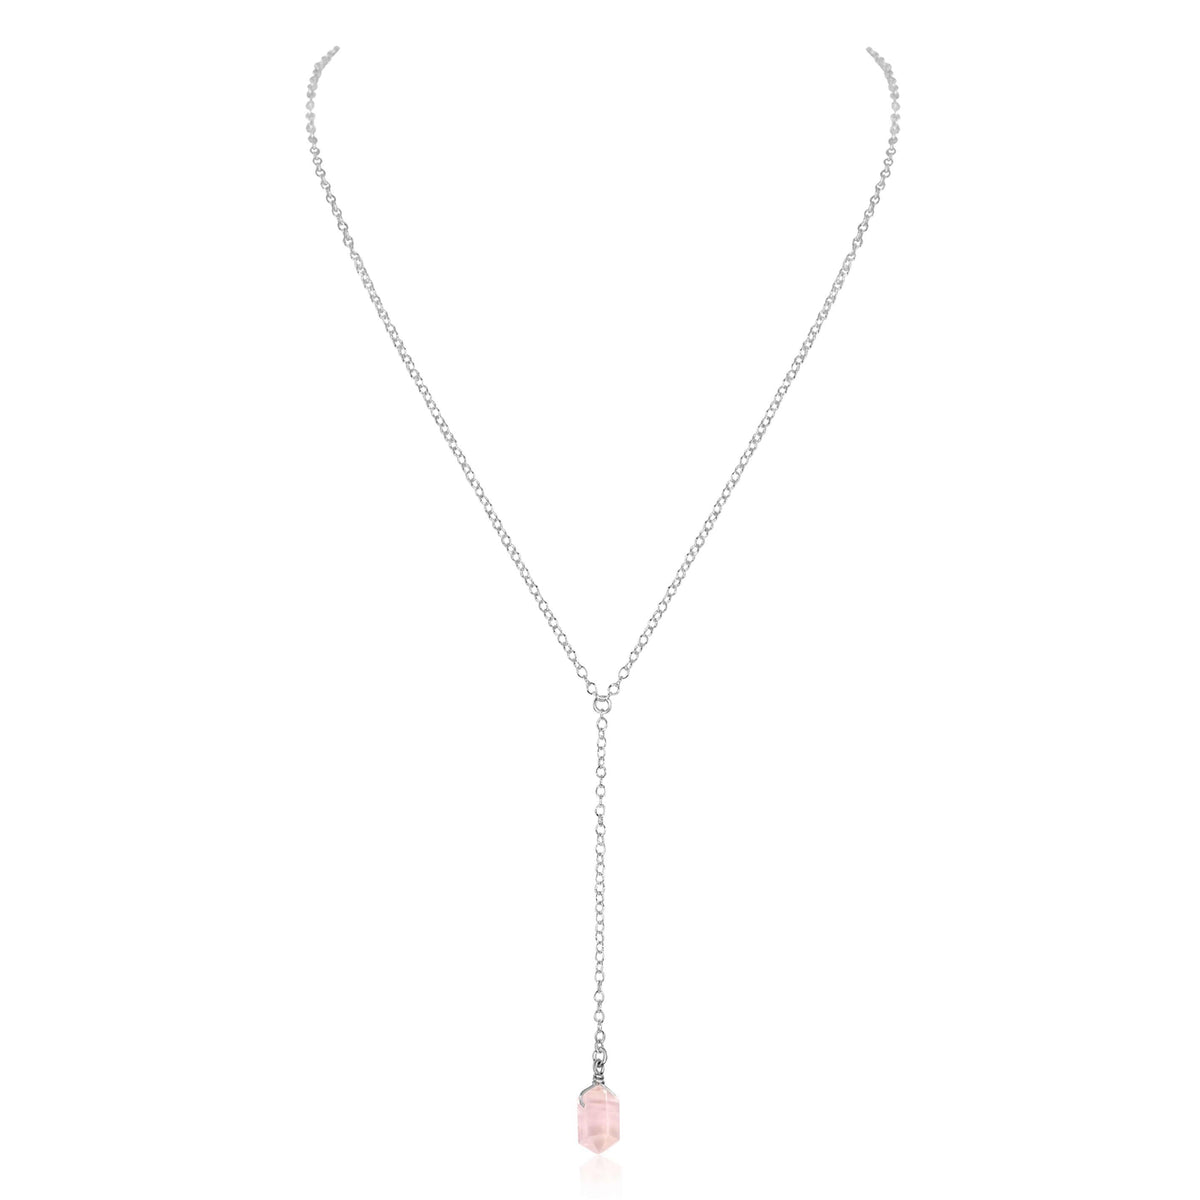 Double Terminated Crystal Lariat - Rose Quartz - Sterling Silver - Luna Tide Handmade Jewellery